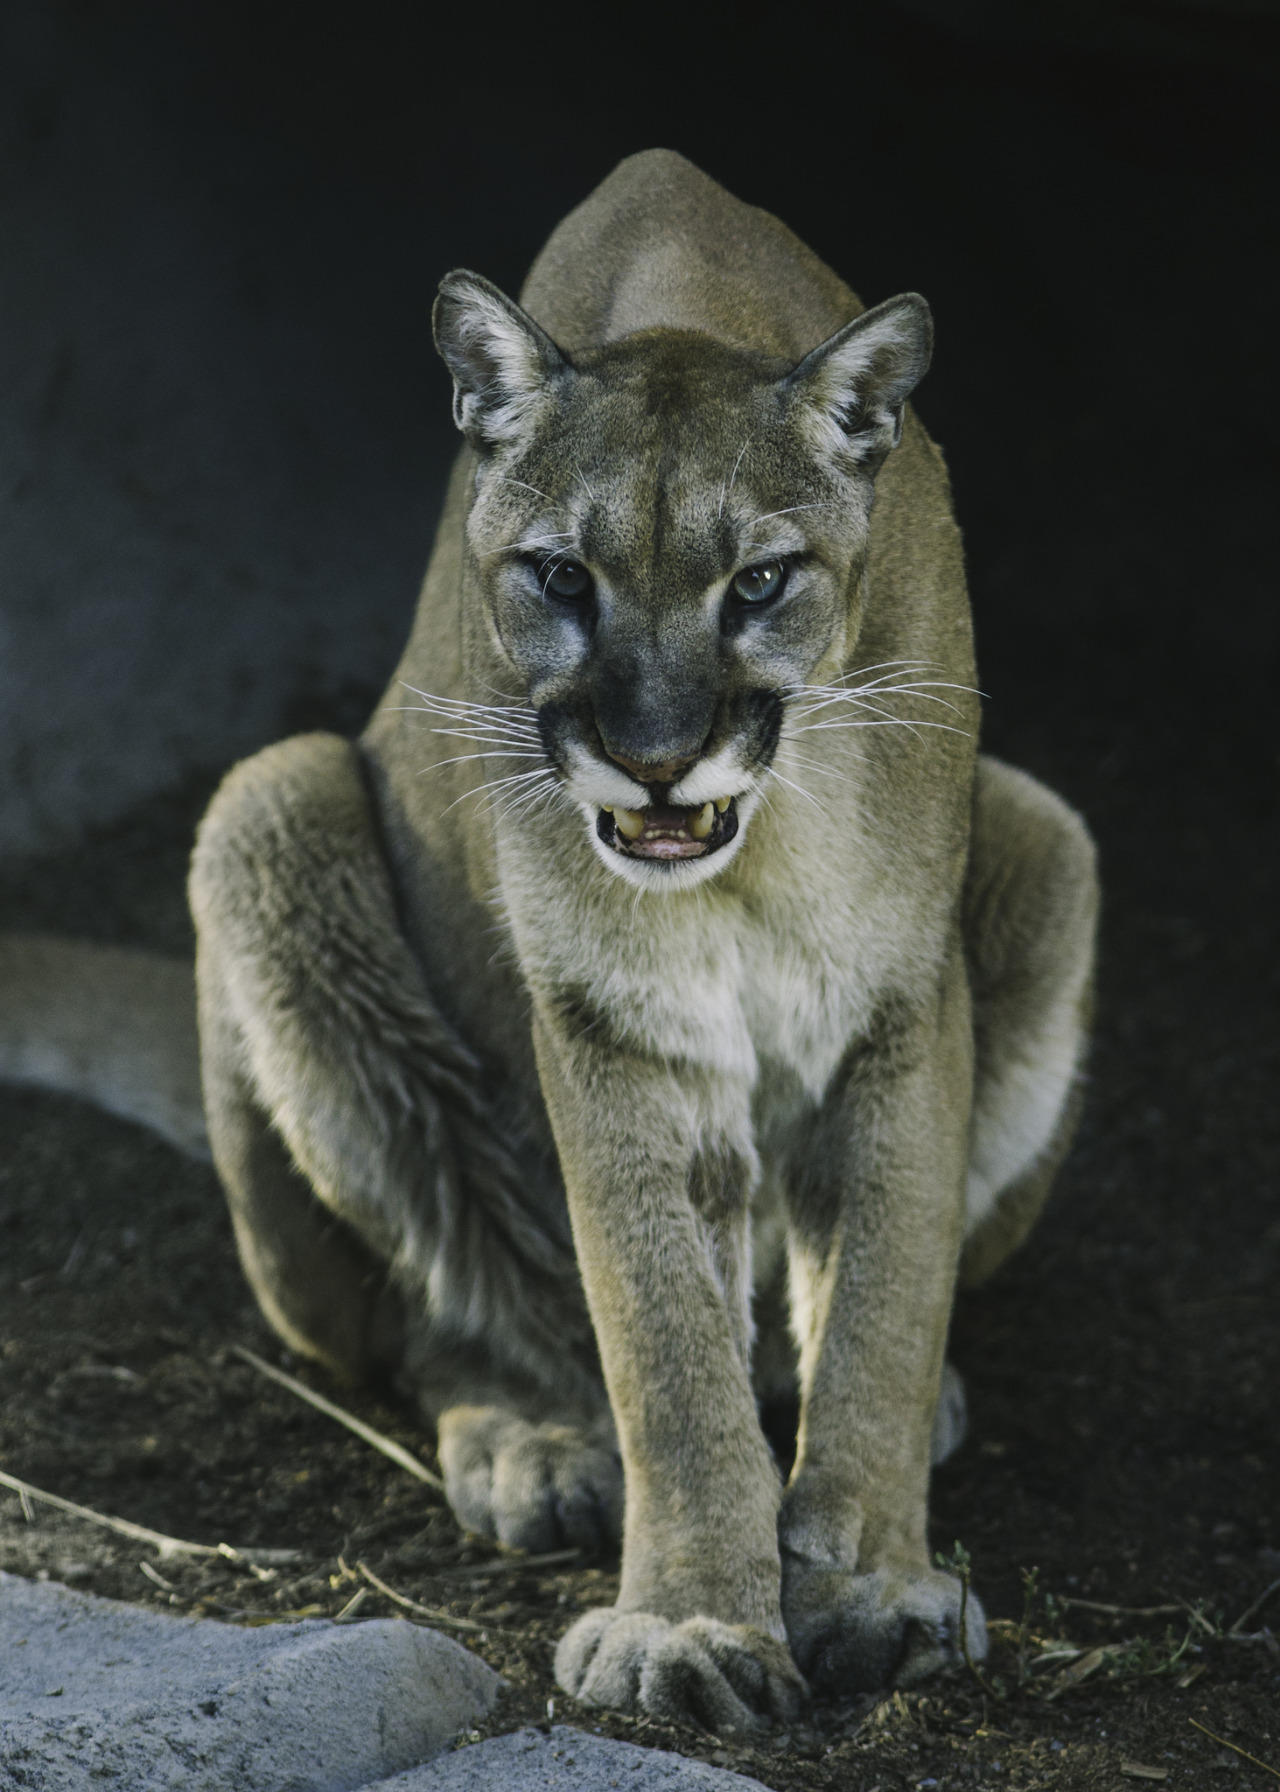 sdzoo:
“Despite what you hear in movies & on TV, mountain lions don’t make that “wild cat scream” very often. More common vocalizations for this adaptable cat include whistles, squeaks, growls, purrs, hisses & yowls. Photo by Paul E.M.
”